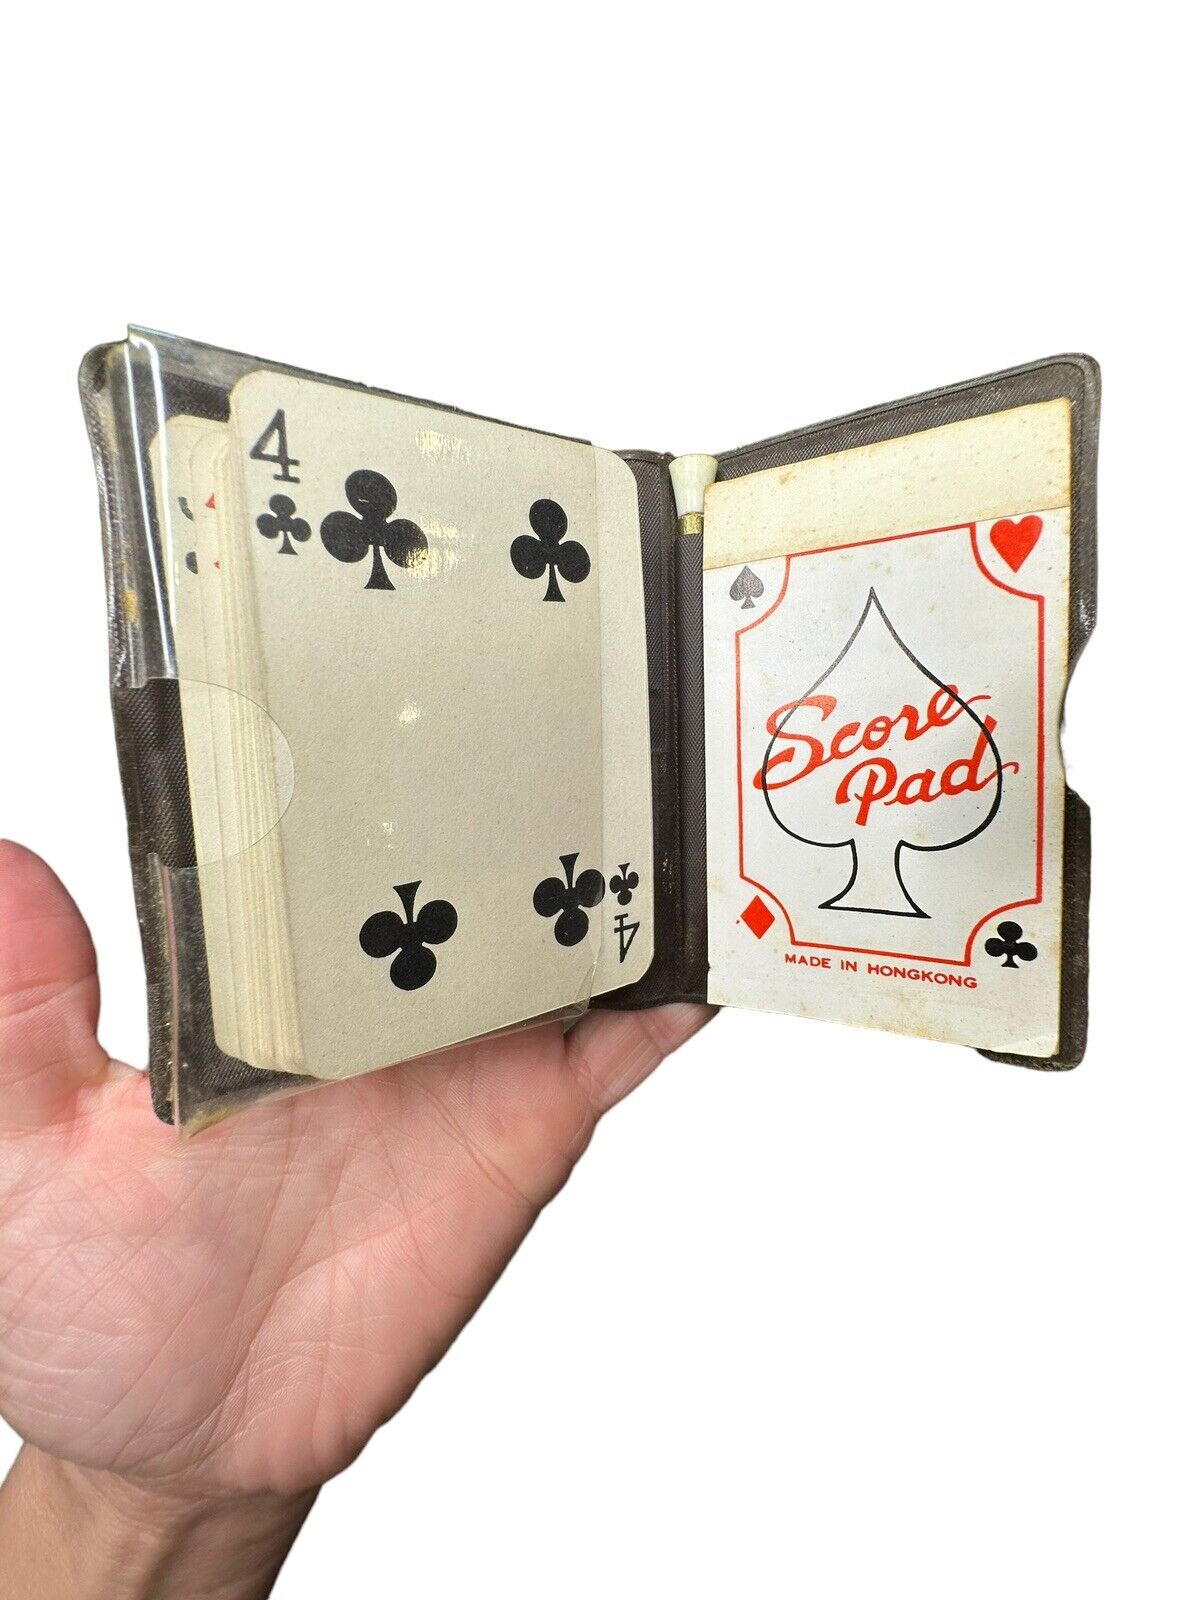 Vintage Playing Card Carrier With Score Pad And Pen, New and Old Deck (One Flaw)